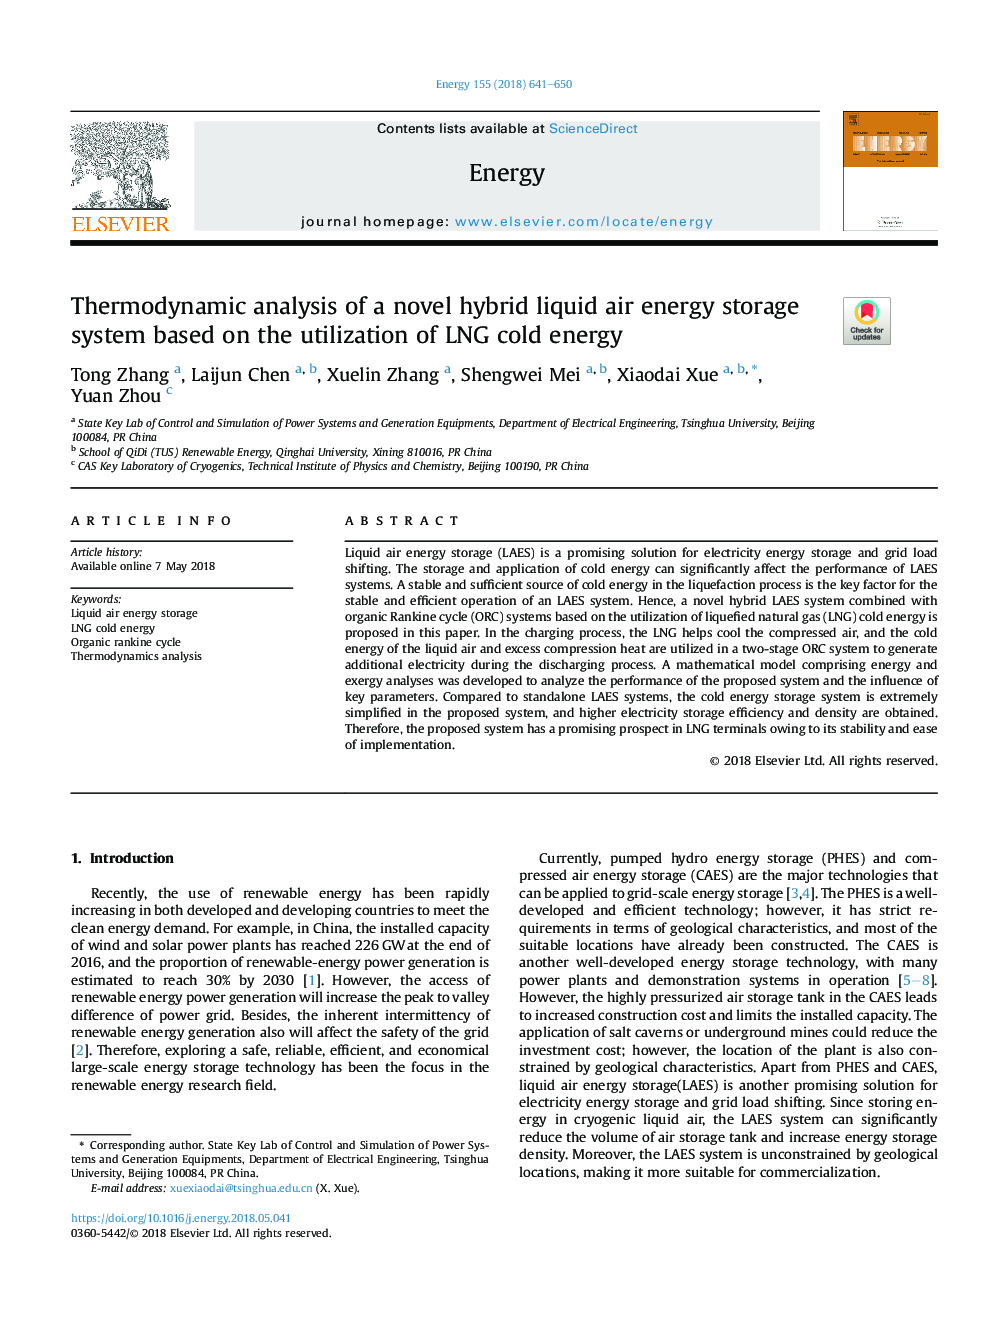 Thermodynamic analysis of a novel hybrid liquid air energy storage system based on the utilization of LNG cold energy